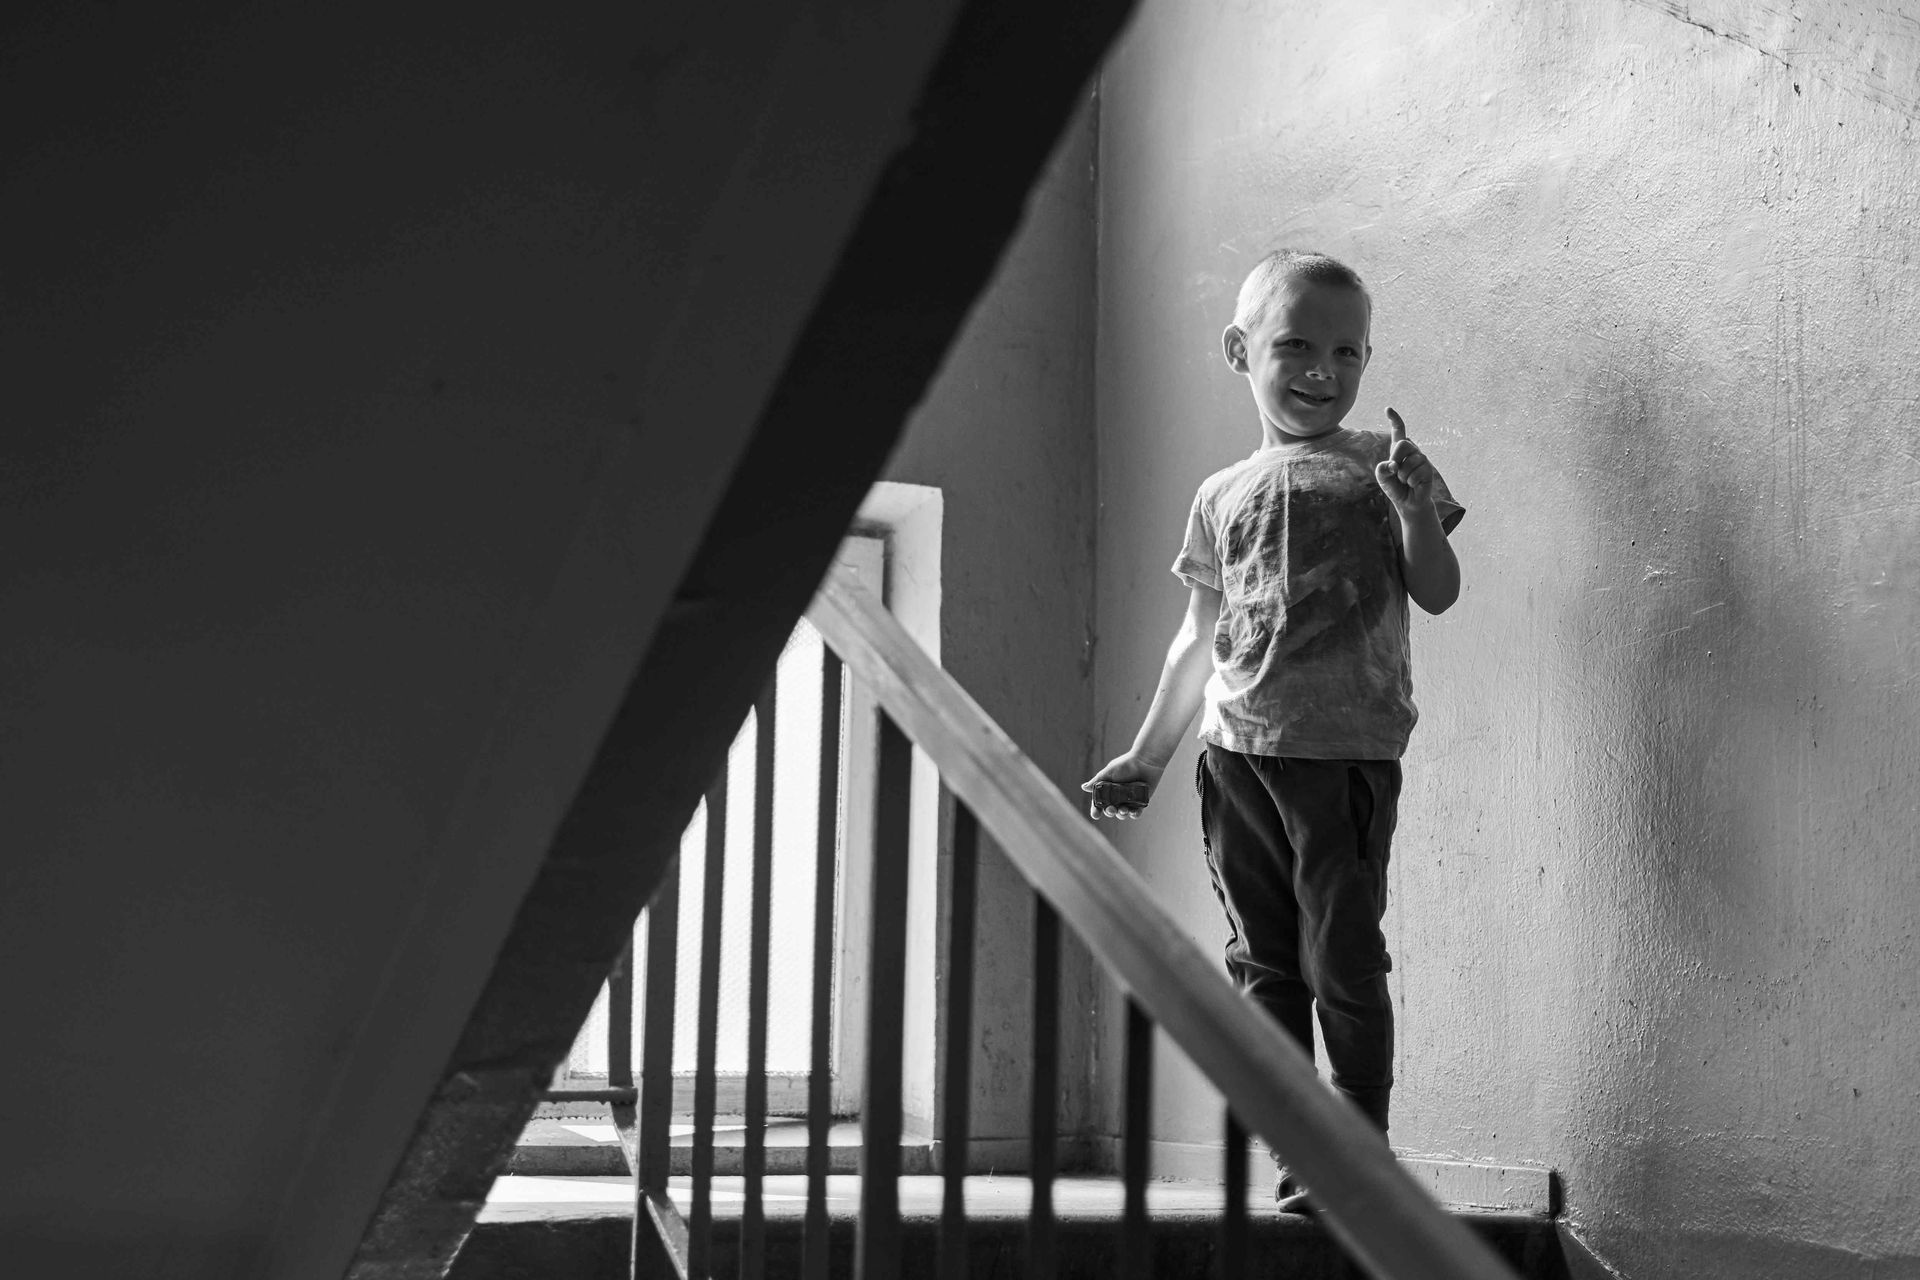 A lifestyle photograph of a boy standing on the steps by the railing on the landing